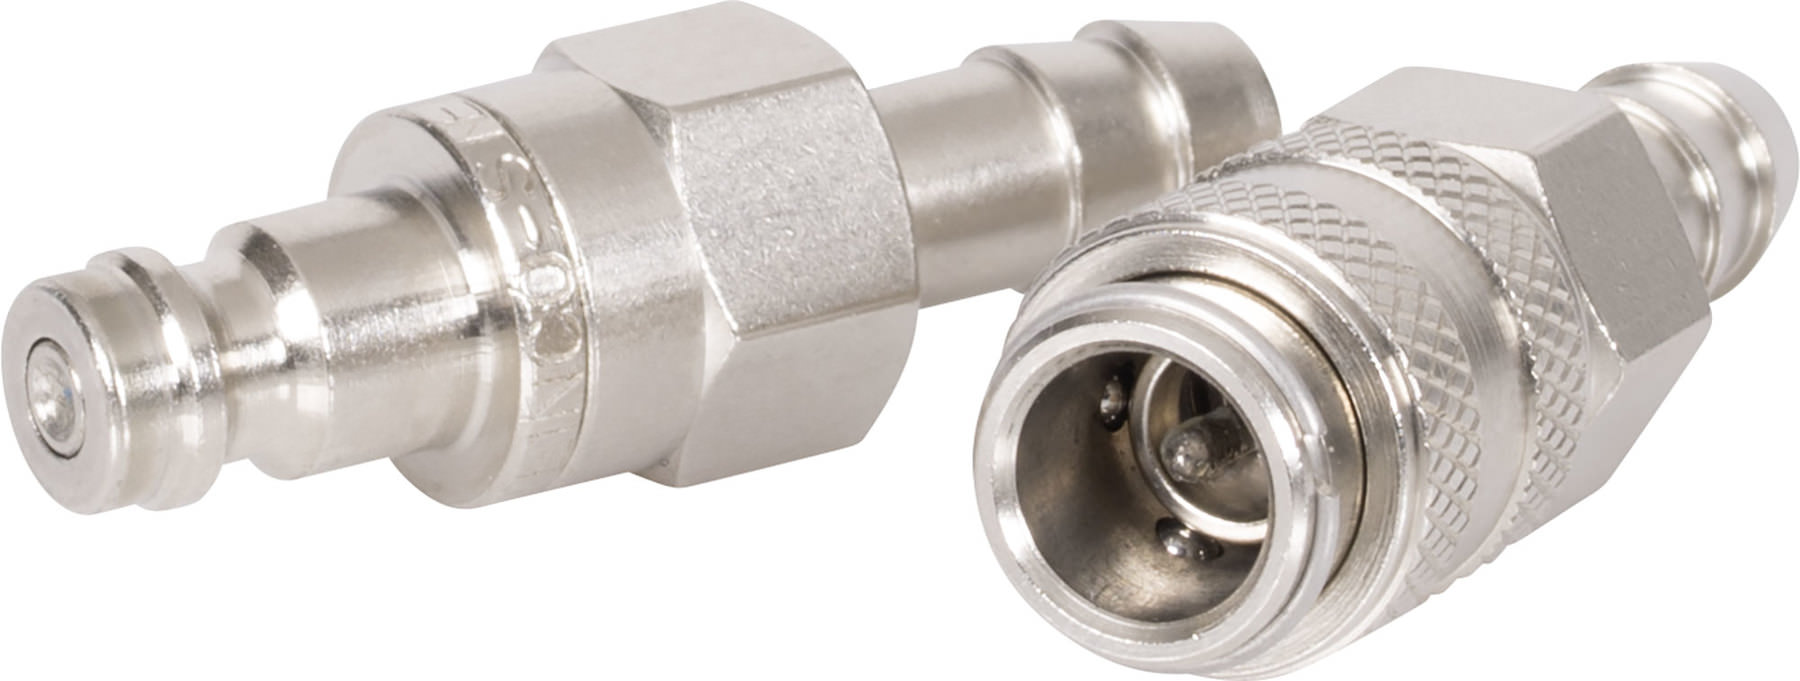 Fuel Hose Line Pump Quick Release Coupling 8mm Nickel Plated Brass 